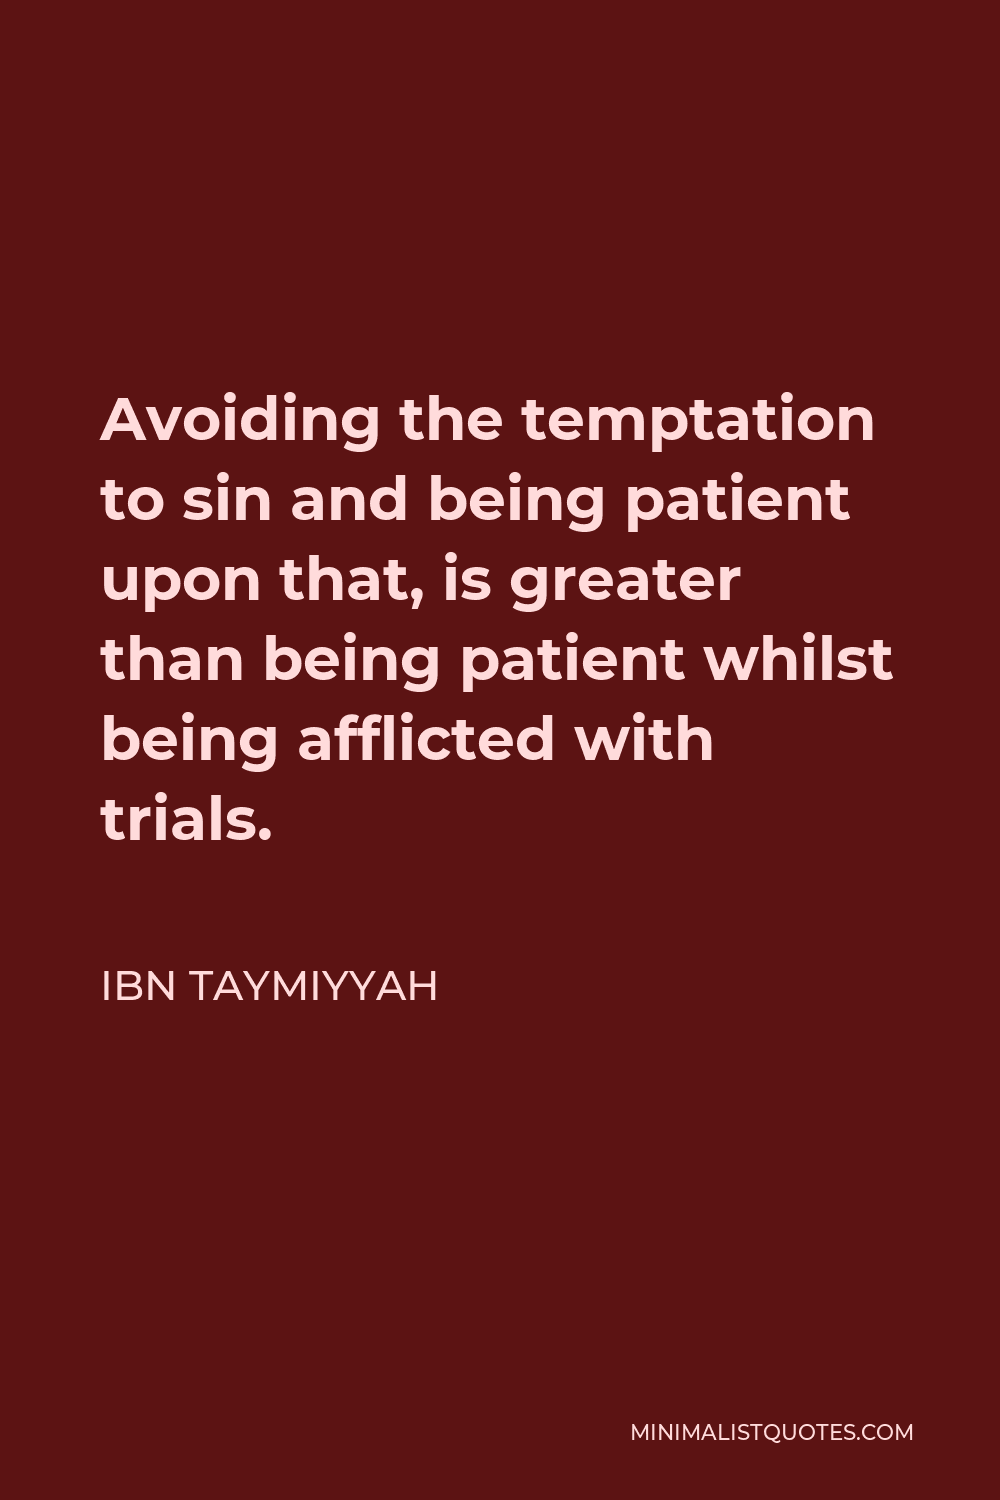 Ibn Taymiyyah Quote - Avoiding the temptation to sin and being patient upon that, is greater than being patient whilst being afflicted with trials.